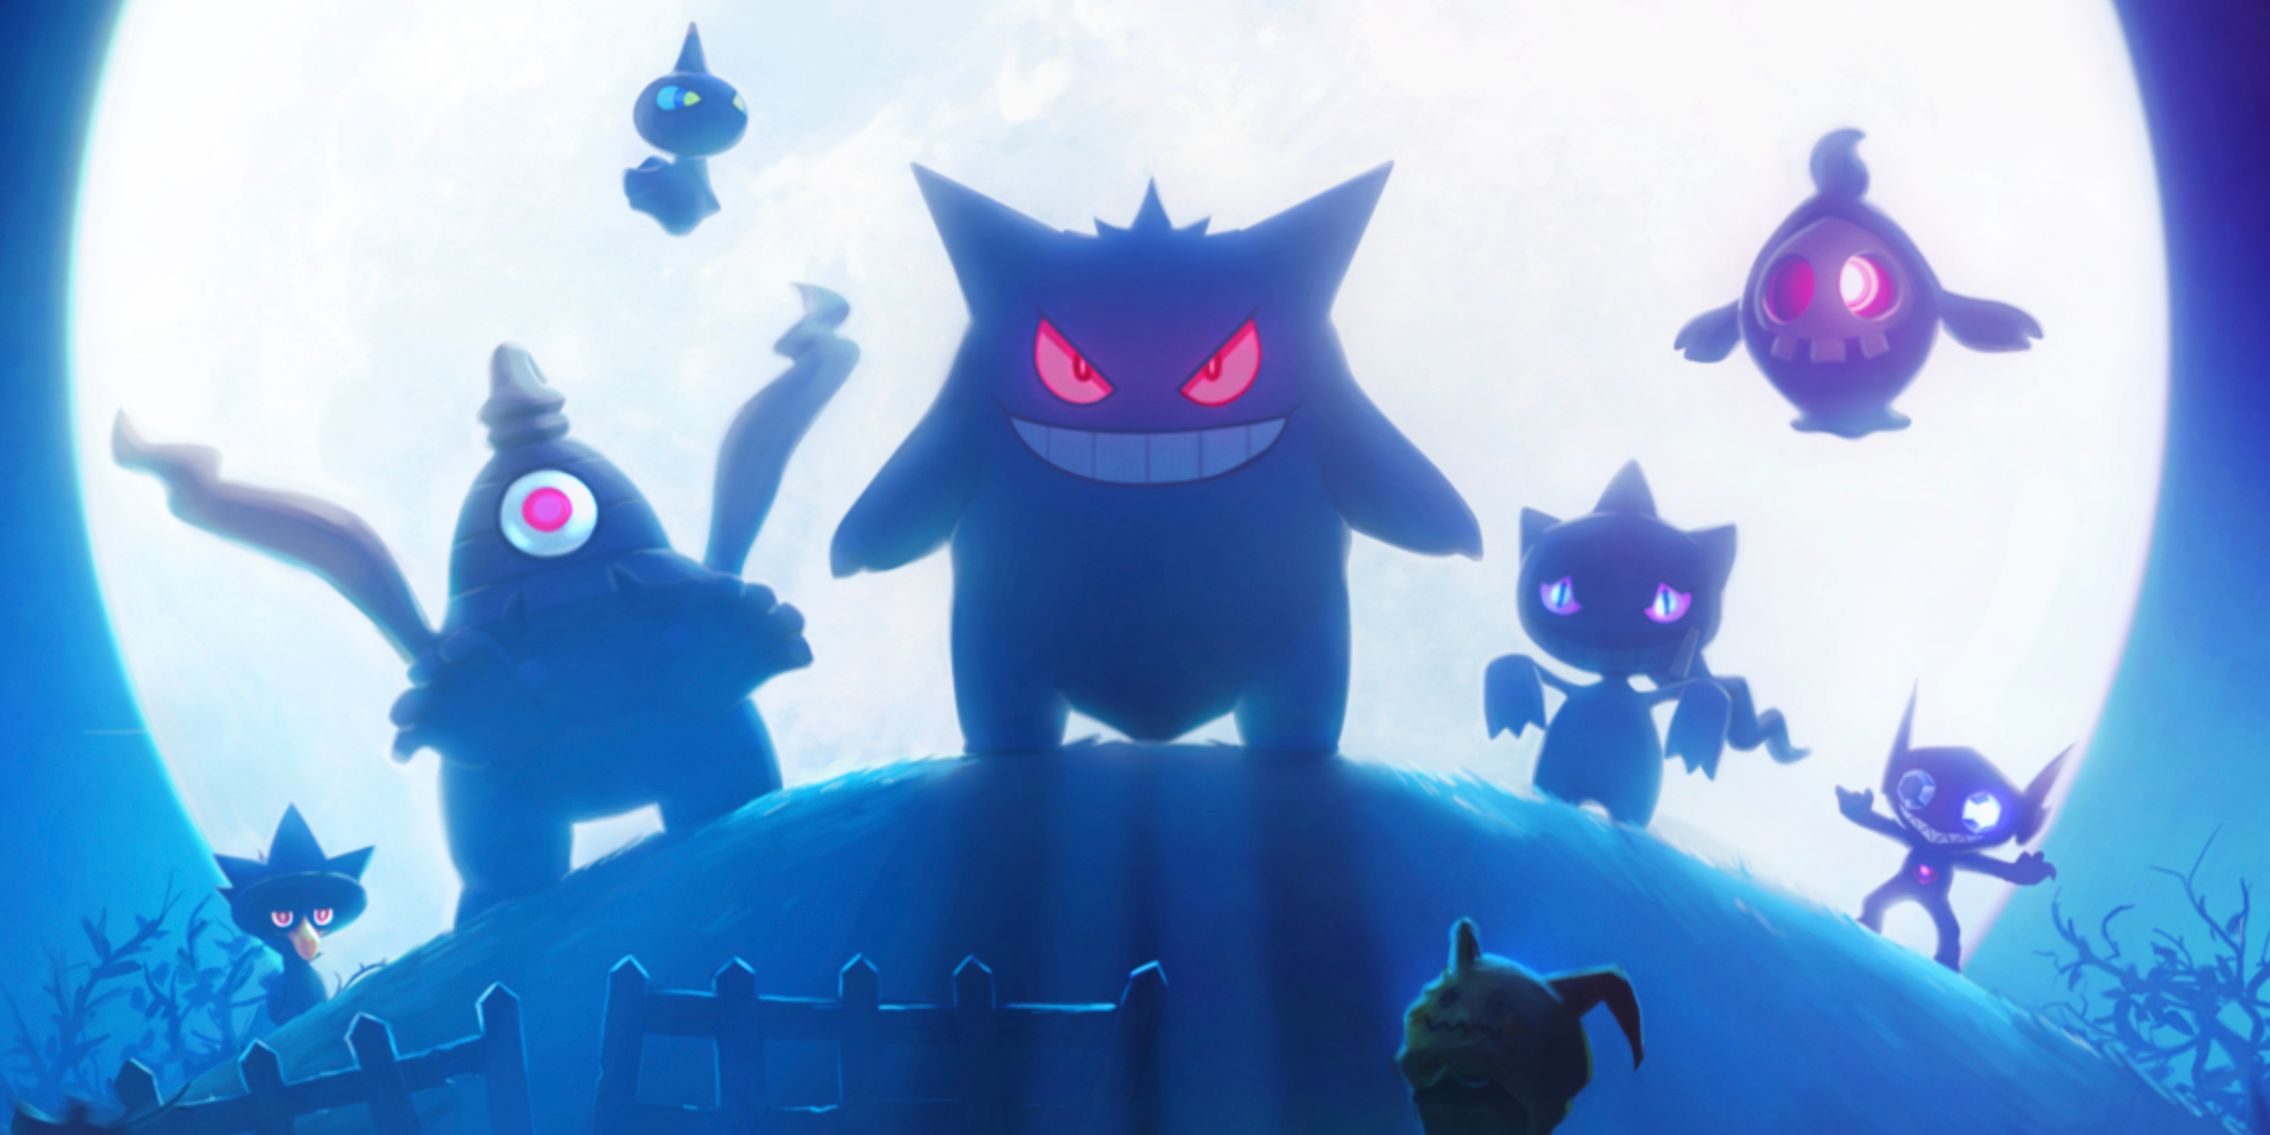 Ghost-type Pokemon stand on a hill in Pokemon GO loading screen